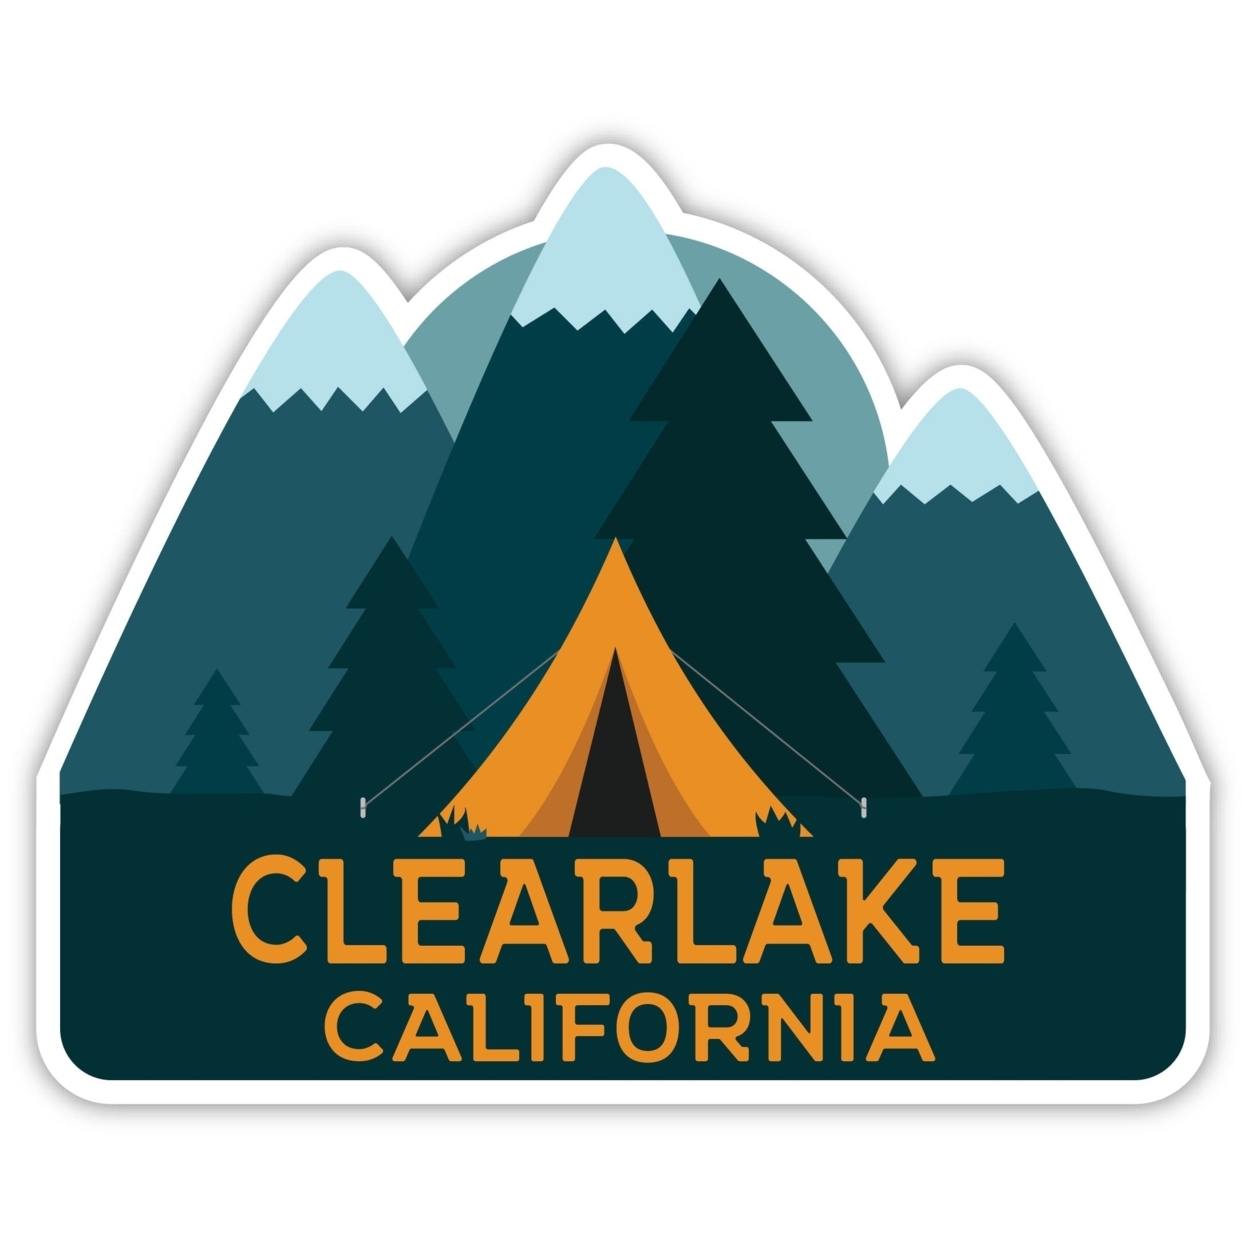 Clearlake California Souvenir Decorative Stickers (Choose Theme And Size) - Single Unit, 2-Inch, Great Outdoors